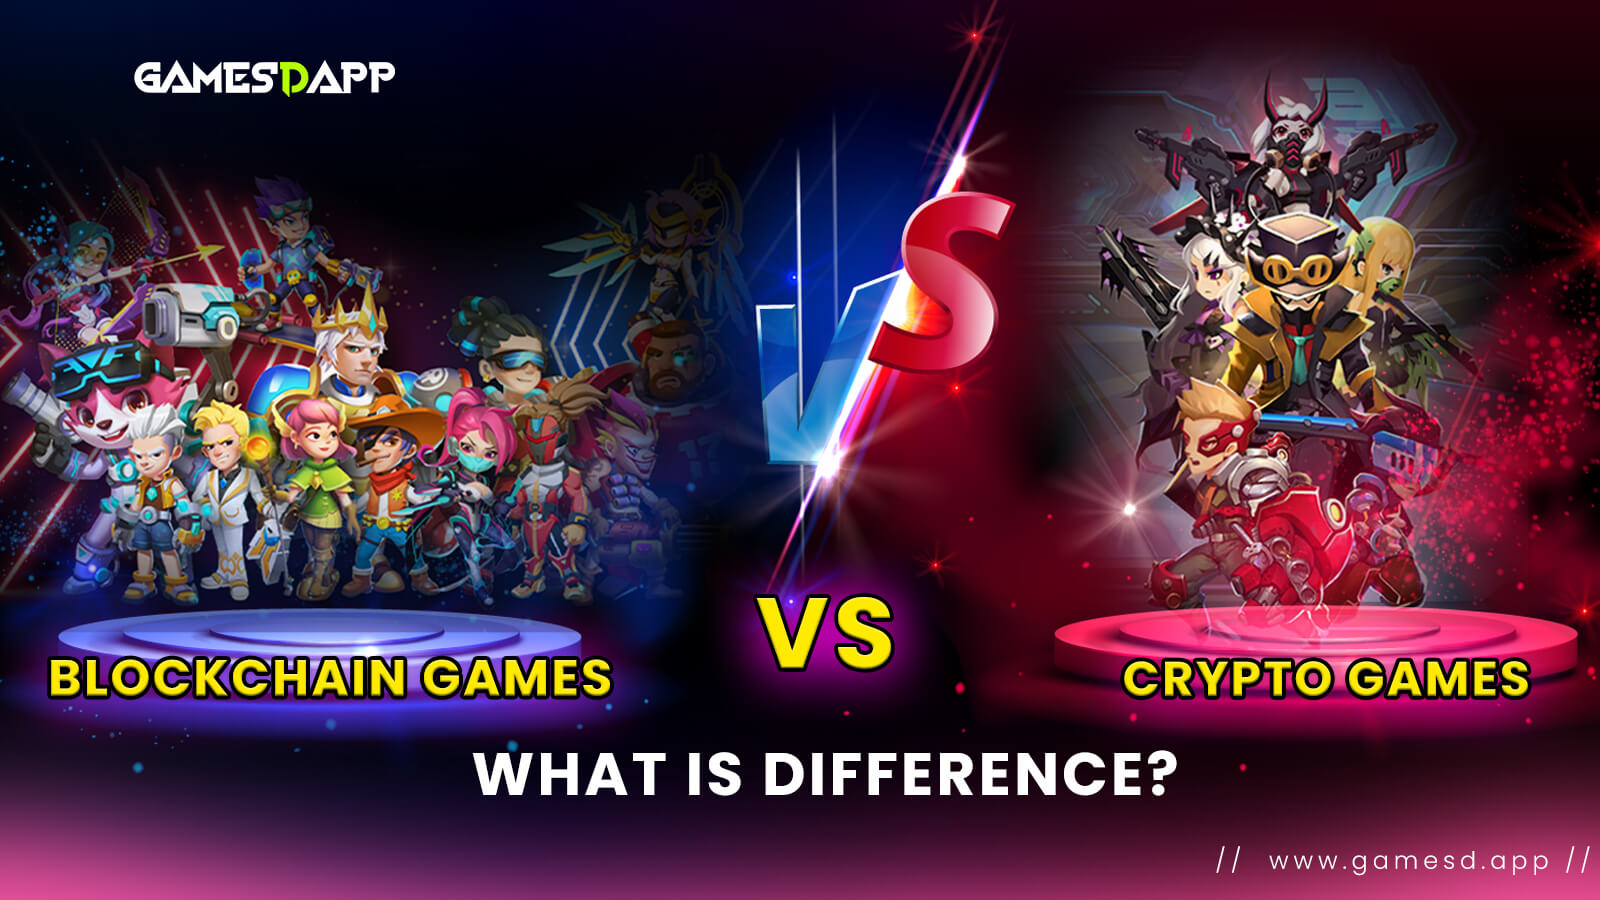 Guide The Difference Between Blockchain Games and Crypto Games.